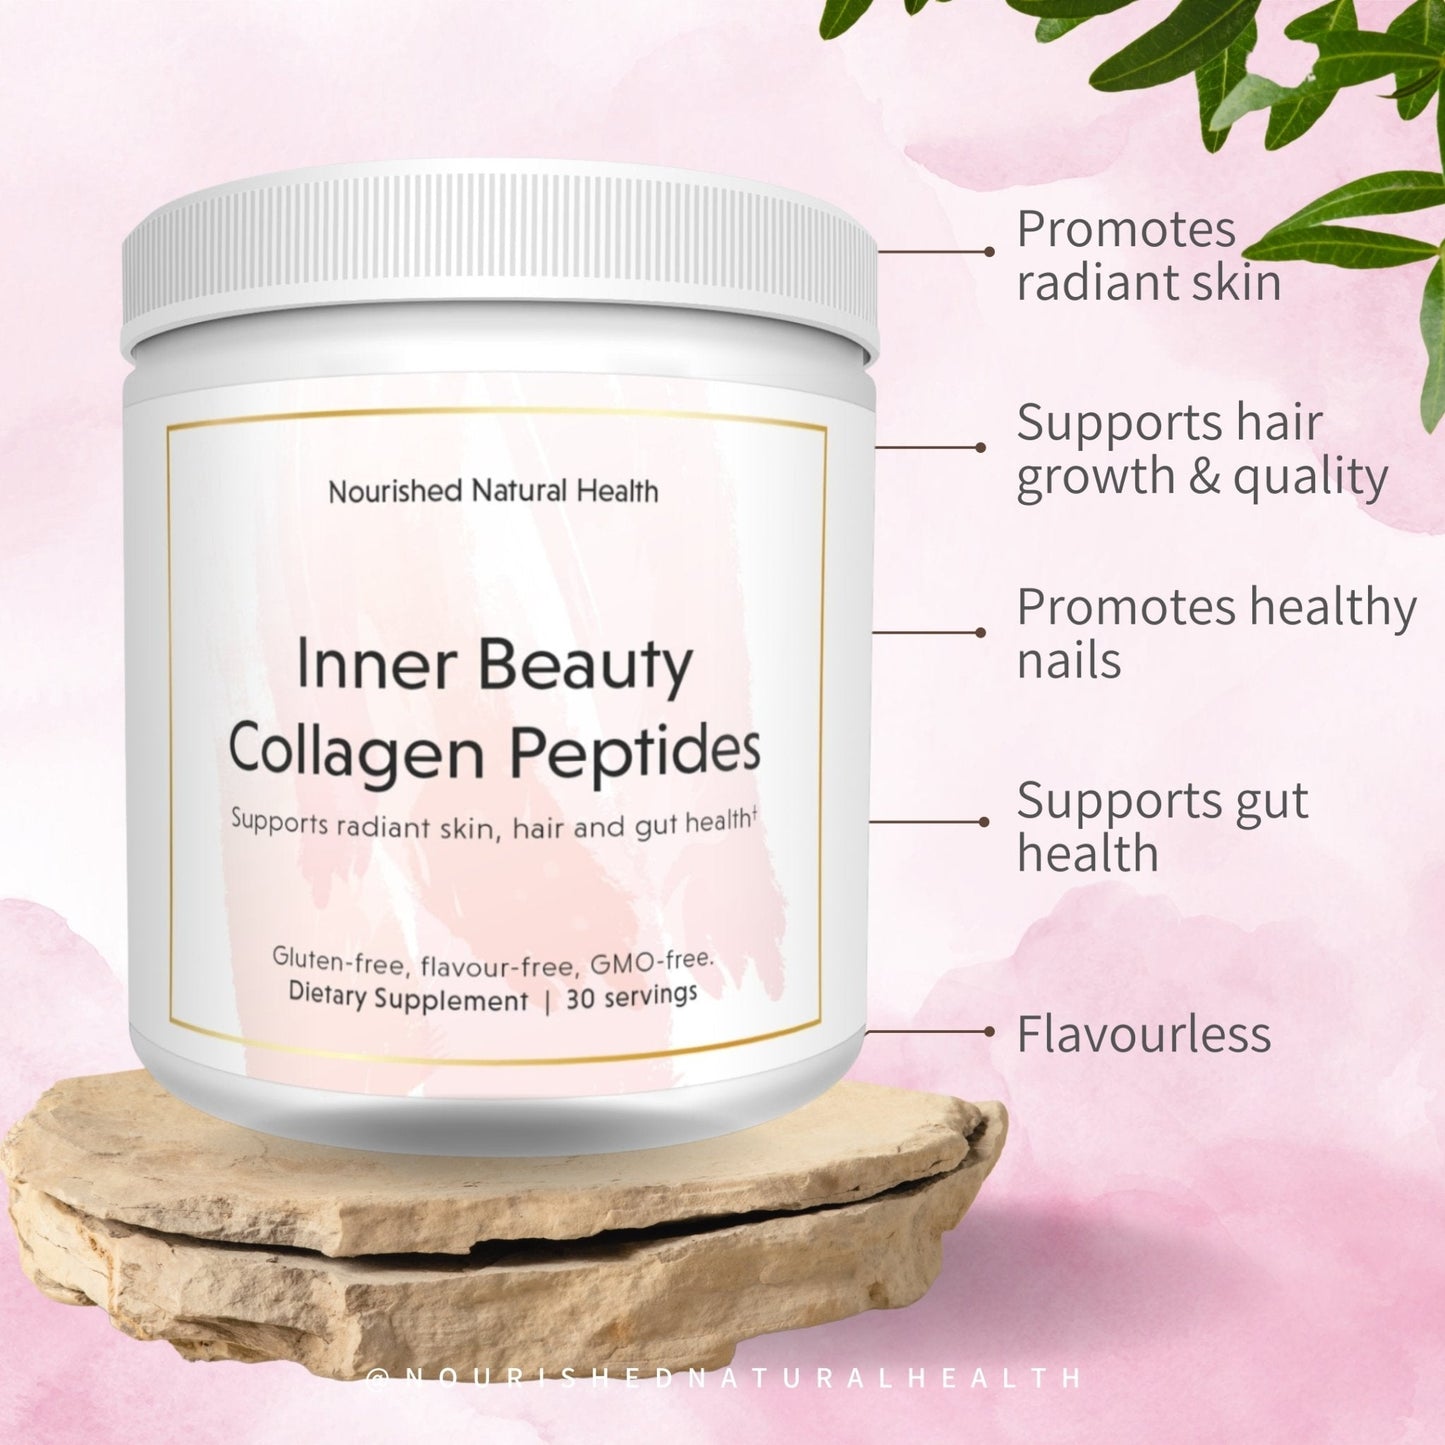 PCOS Acne & Scarring Support Bundle - Save 20%+ - Nourished Natural Health